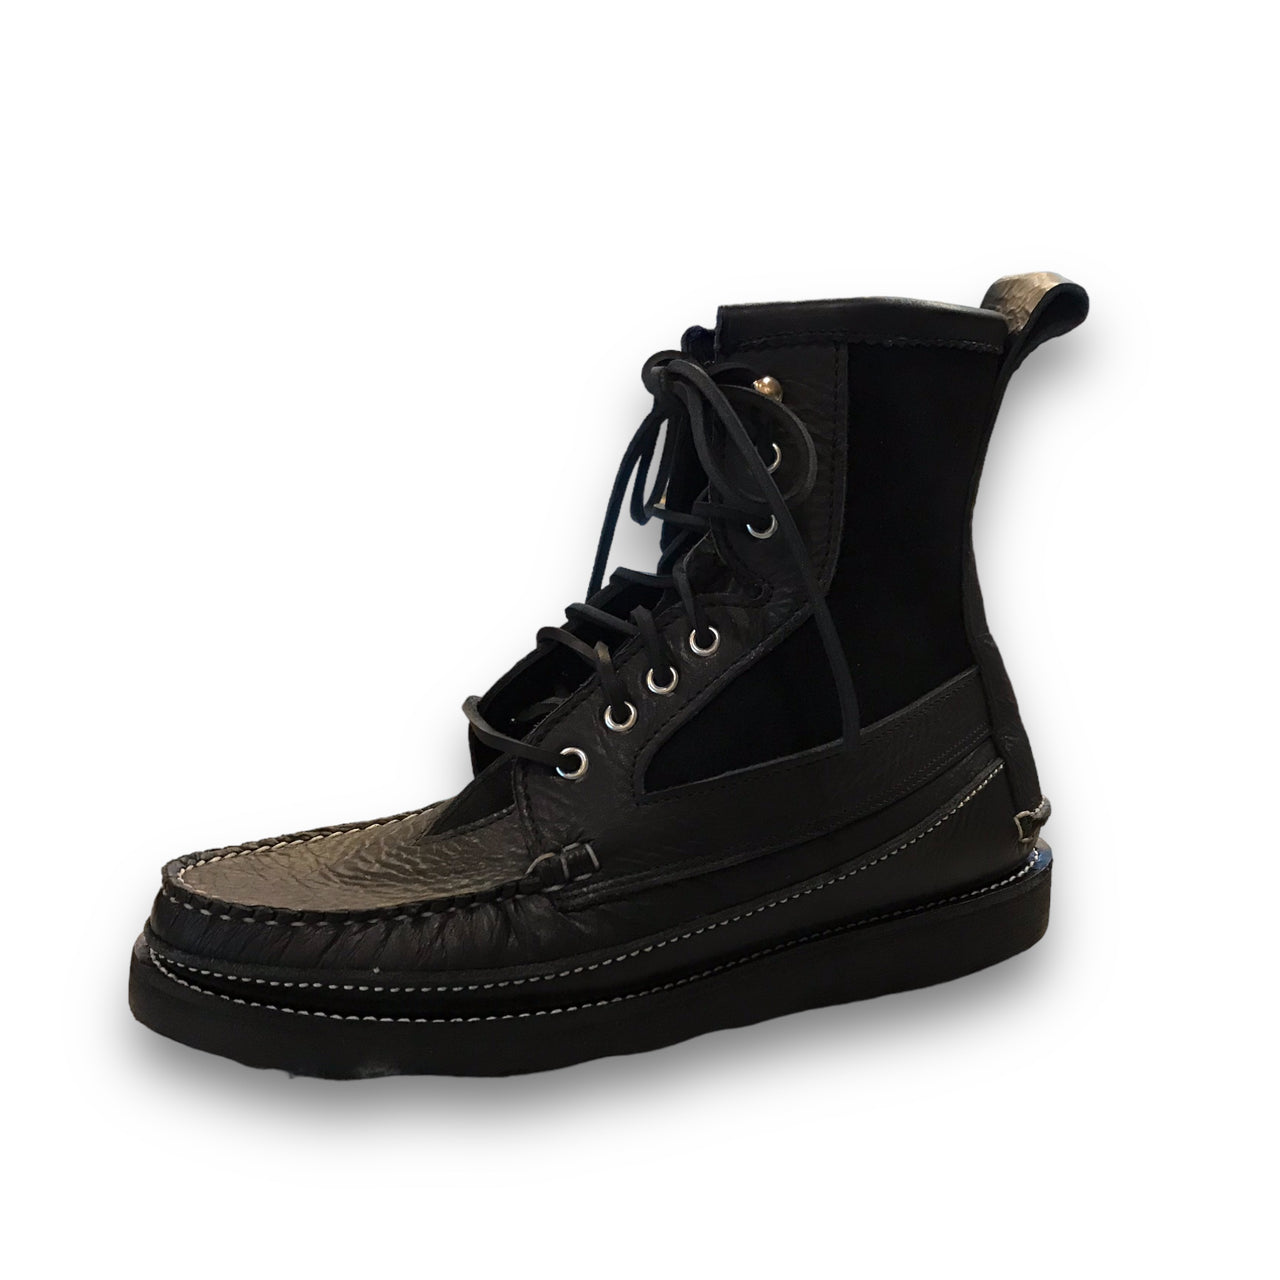 Rangley Boot | Black Grizzly